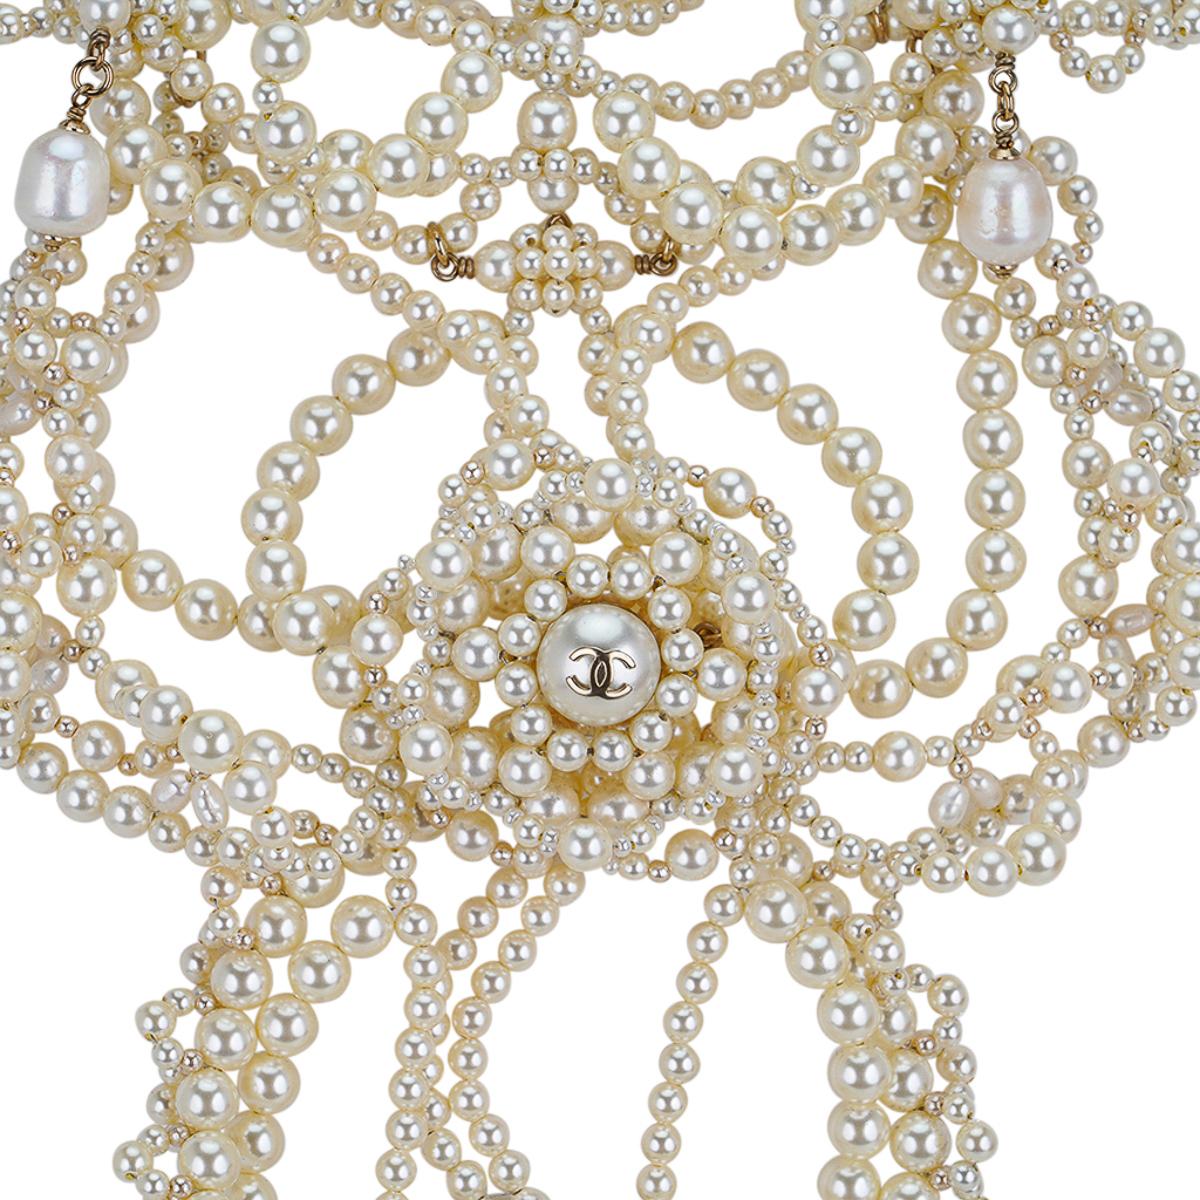 Mightychic offers a very rare Chanel 2105A limited edition fresh water pearl necklace.
Necklace has cascading entwined pearls with a center Camelia and CC pearl.
Unmistakably Chanel.
This fabulous bib style Chanel necklace is a show stopping